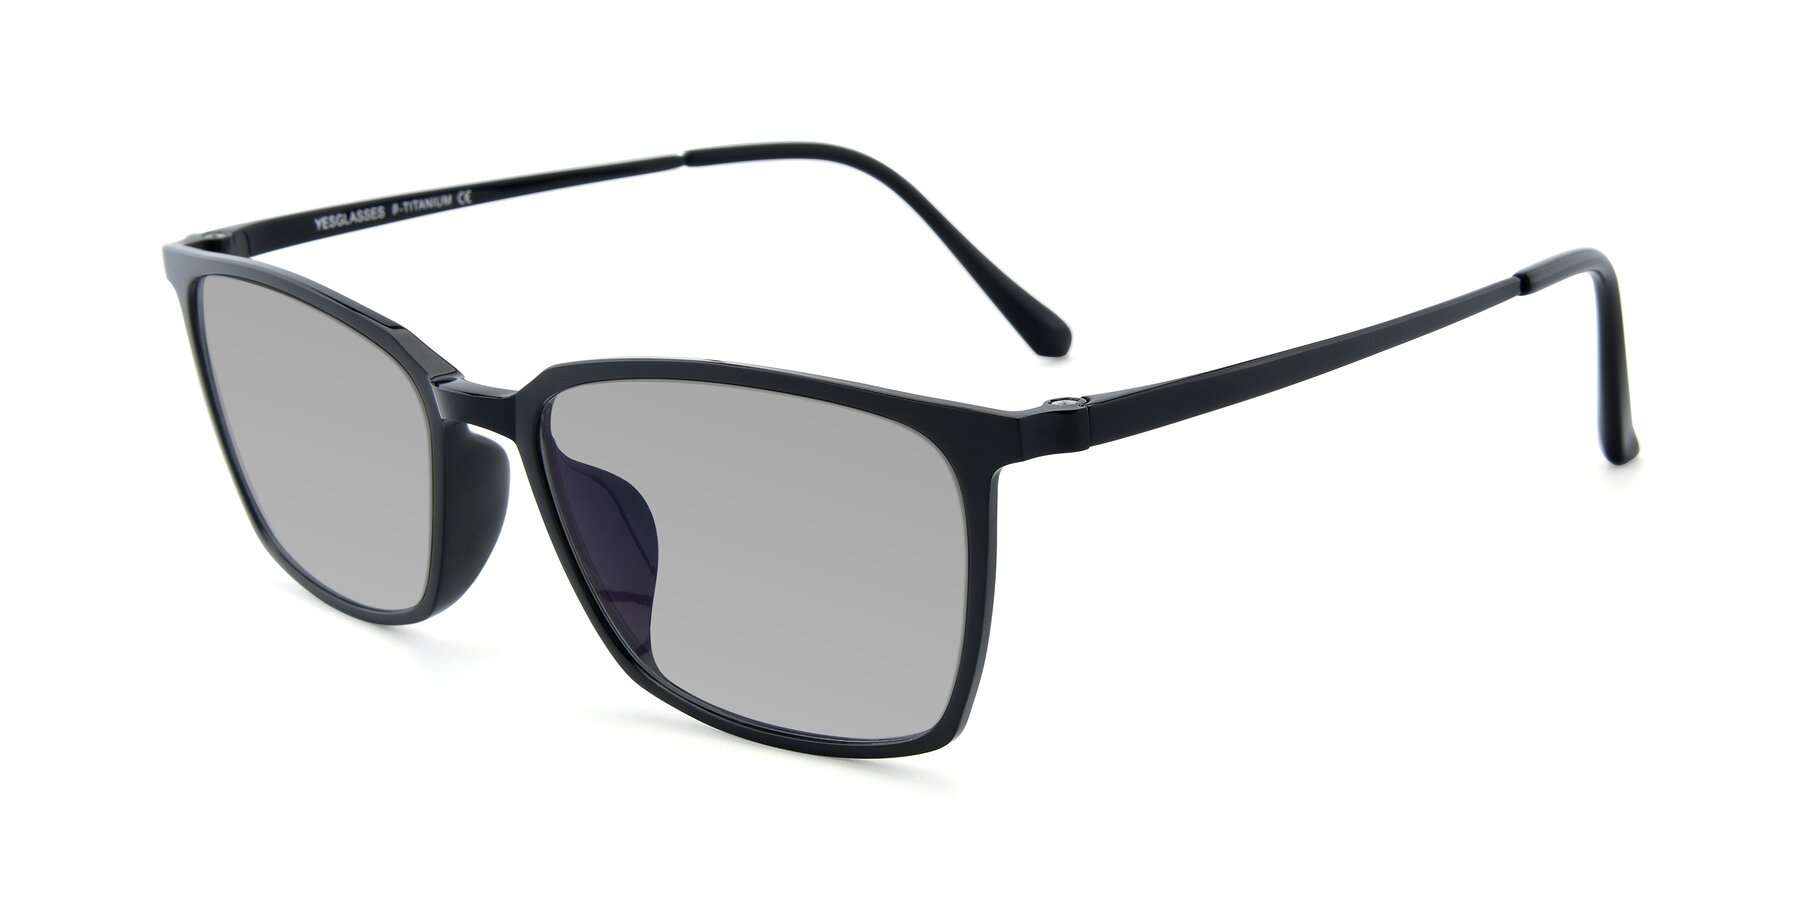 Angle of XC-5009 in Black with Light Gray Tinted Lenses